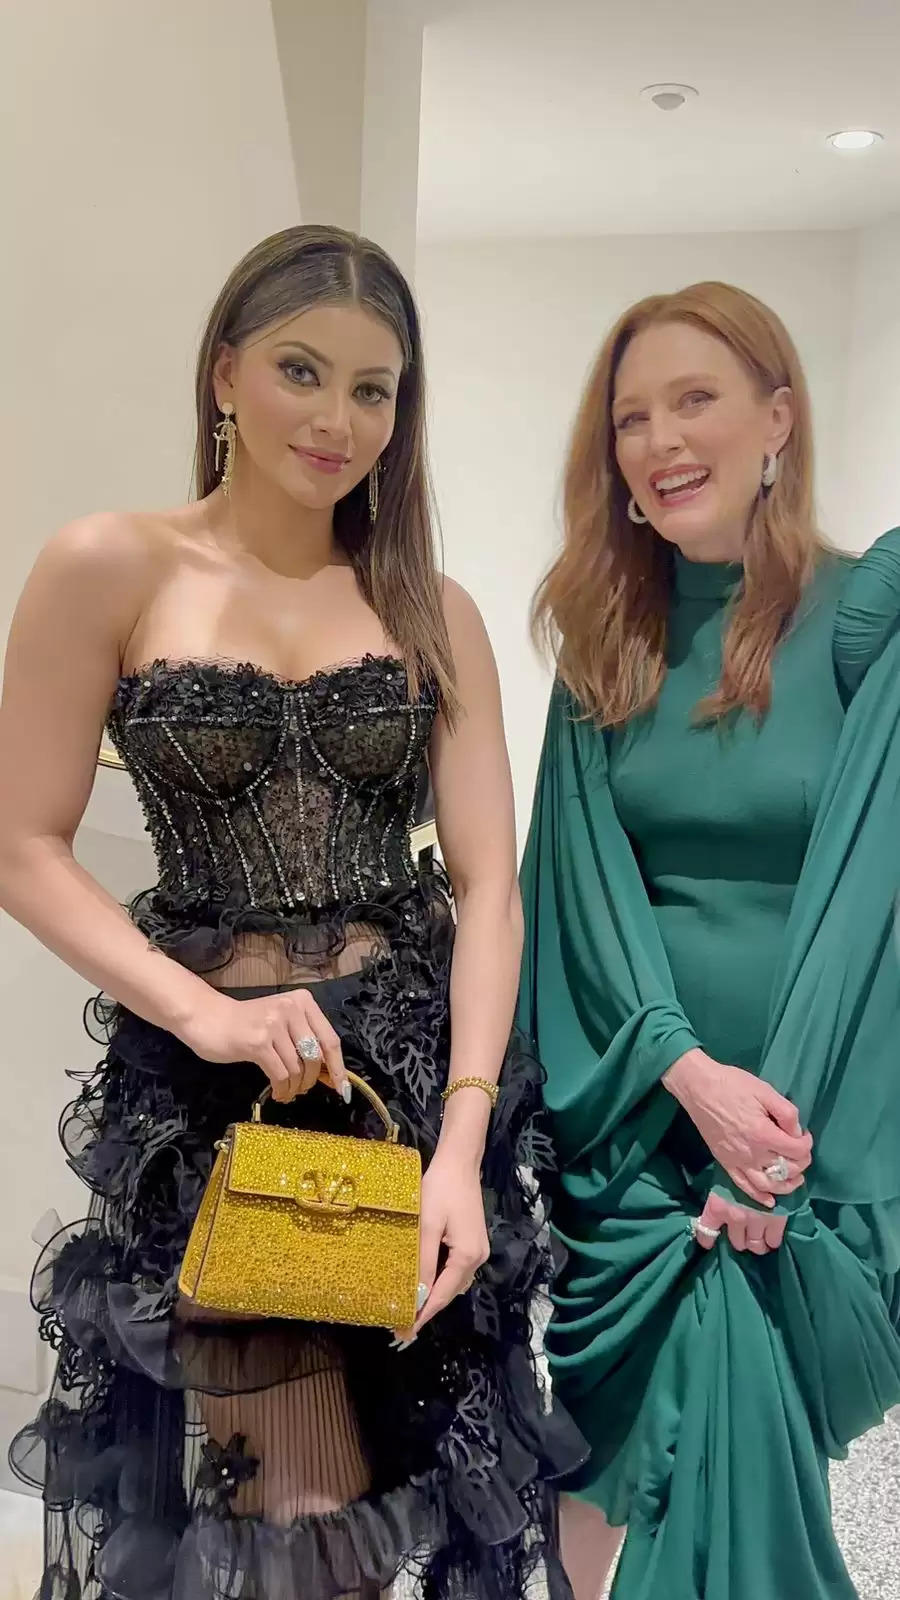 Cannes Film Festival 2023 : Urvashi Rautela Poses With May December Actor Julianne Moore At Cannes 2023, says, "“What an unforgettable night in Cannes"